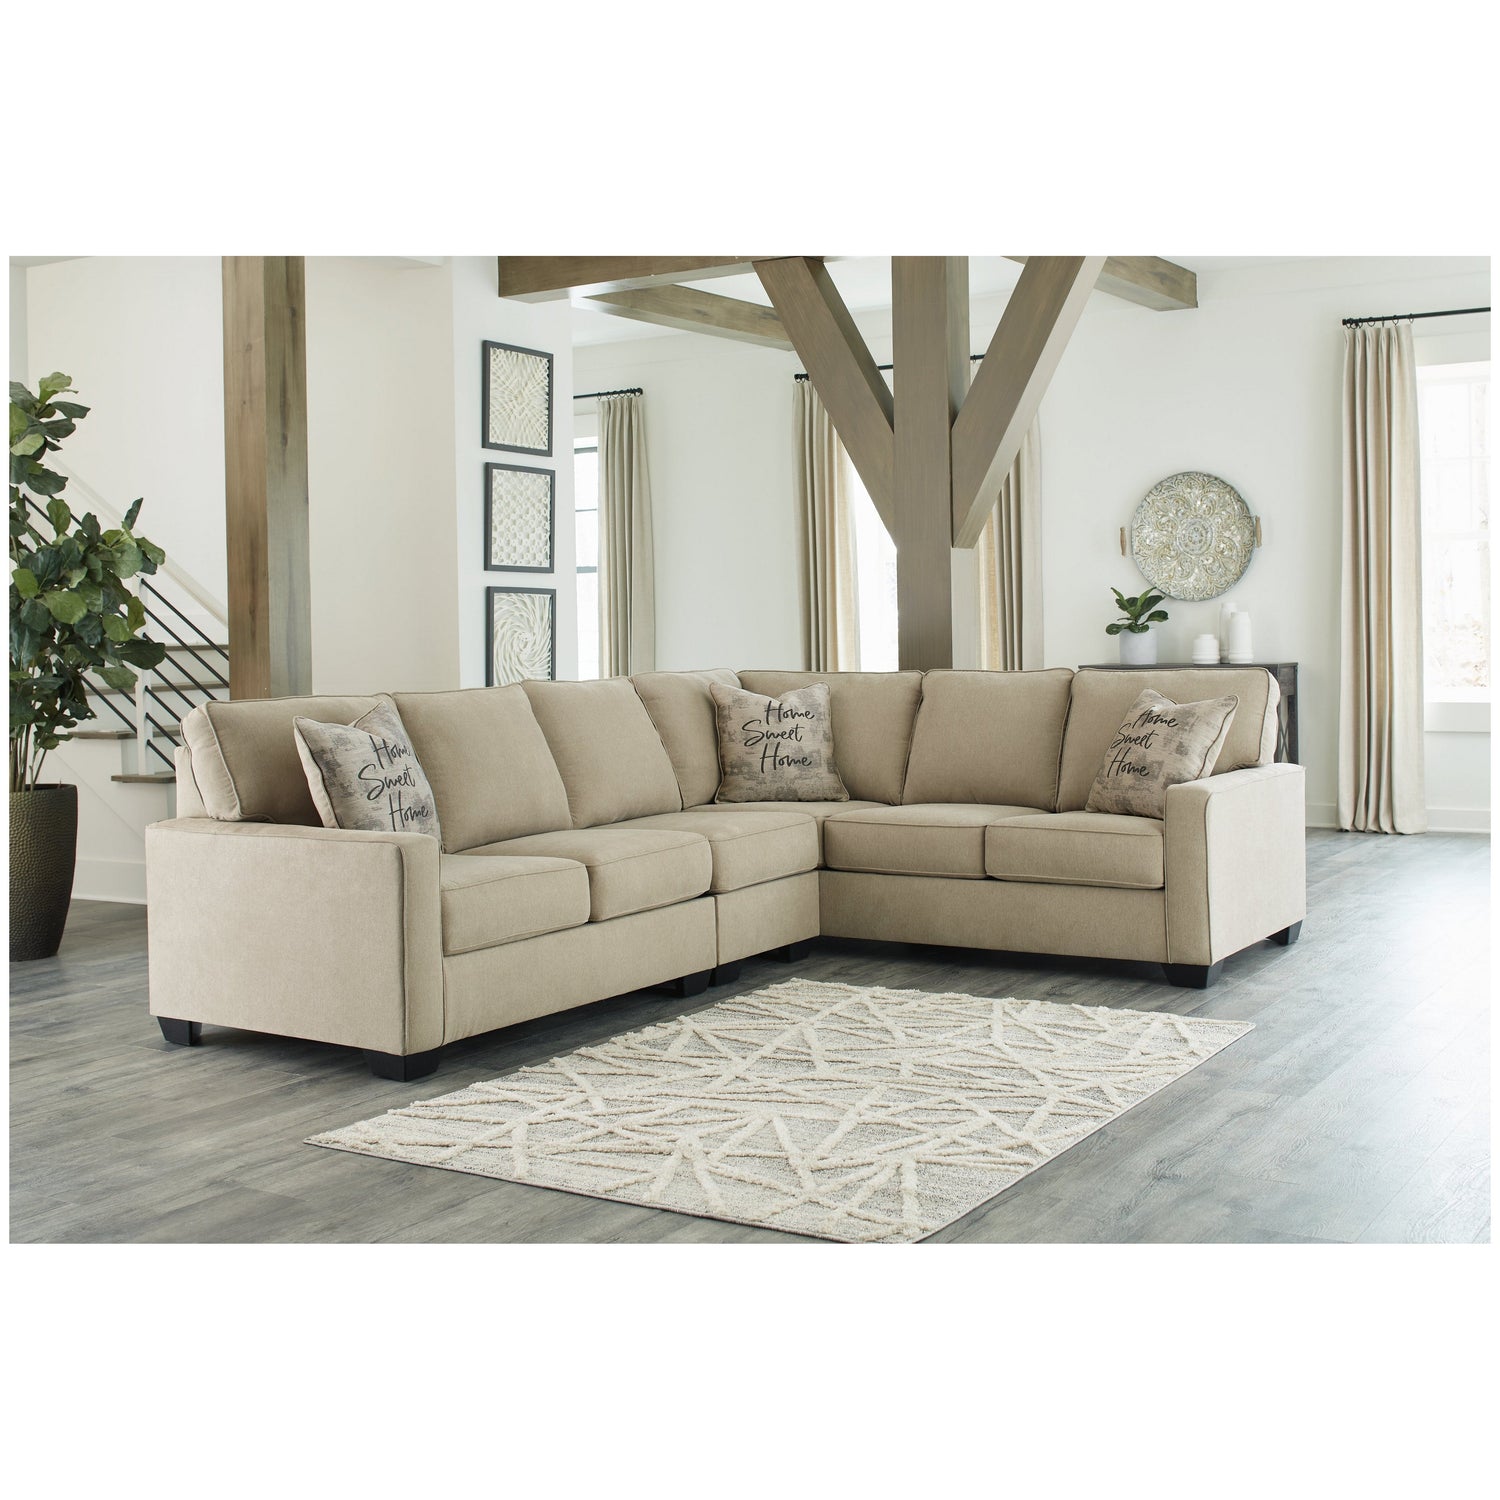 Lucina 3-Piece Sectional Ash-59006S4